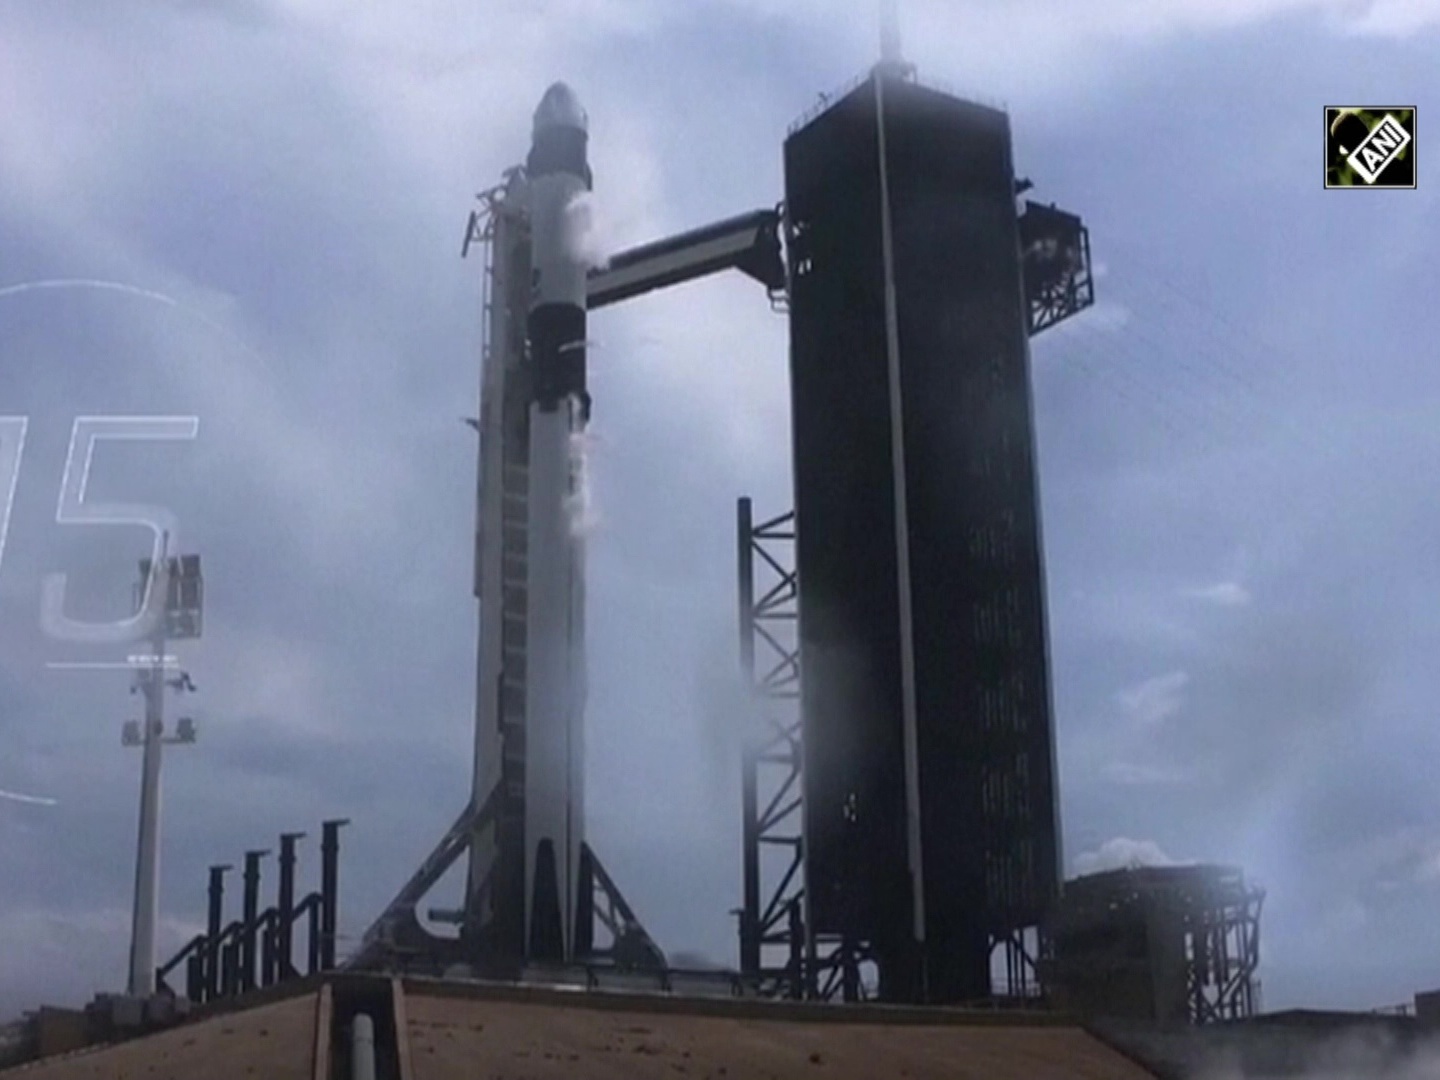 Watch: NASA, SpaceX launch American astronauts to Space Station from Kennedy Space Center